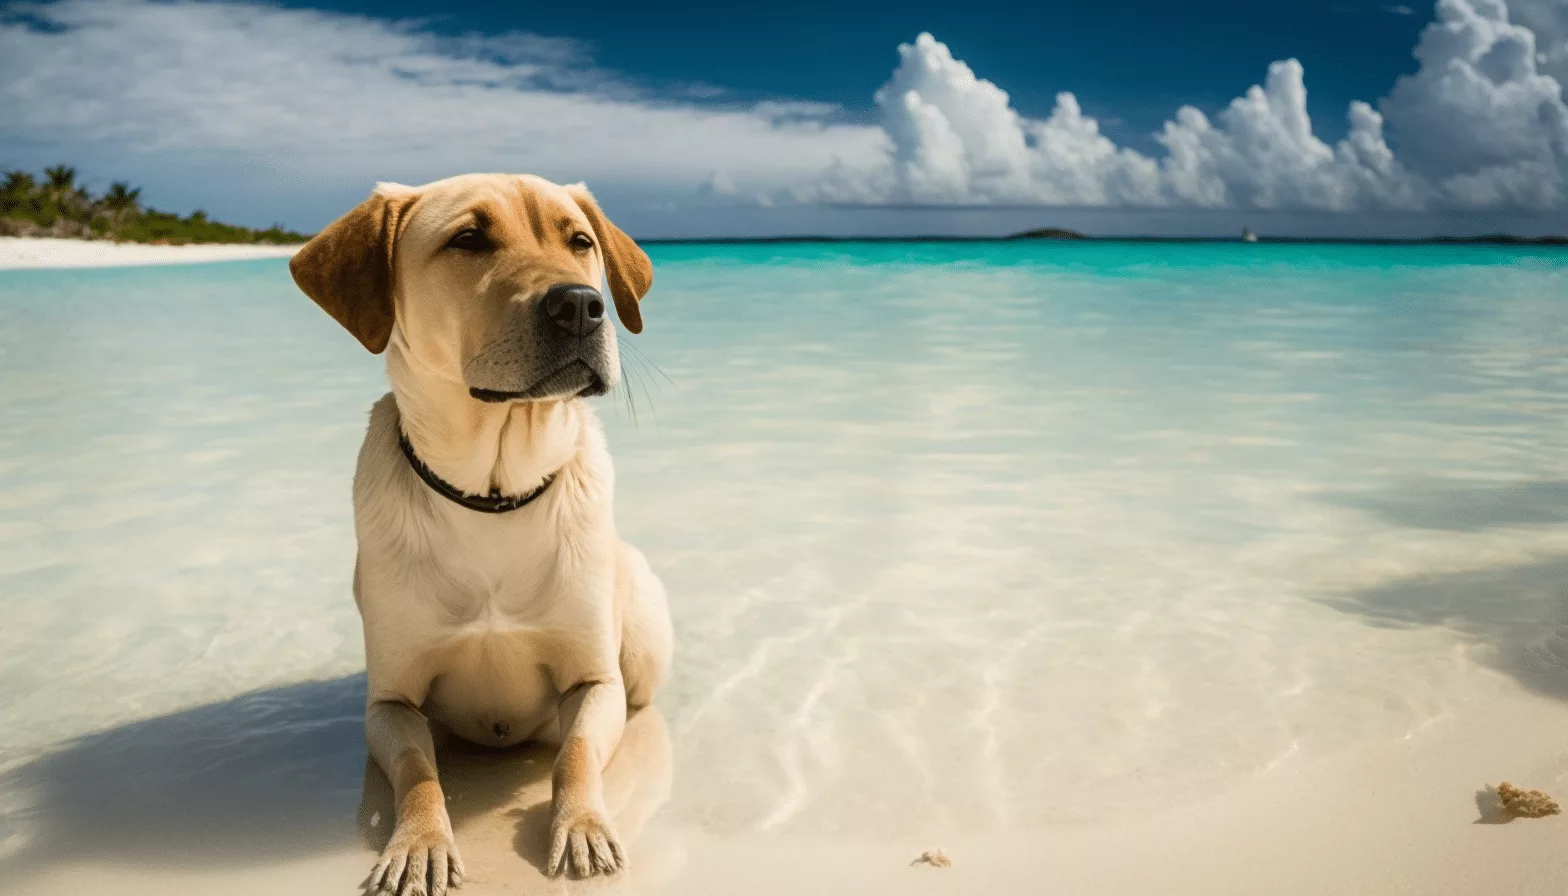 A labrador retriever sits on a beach looking at the water.